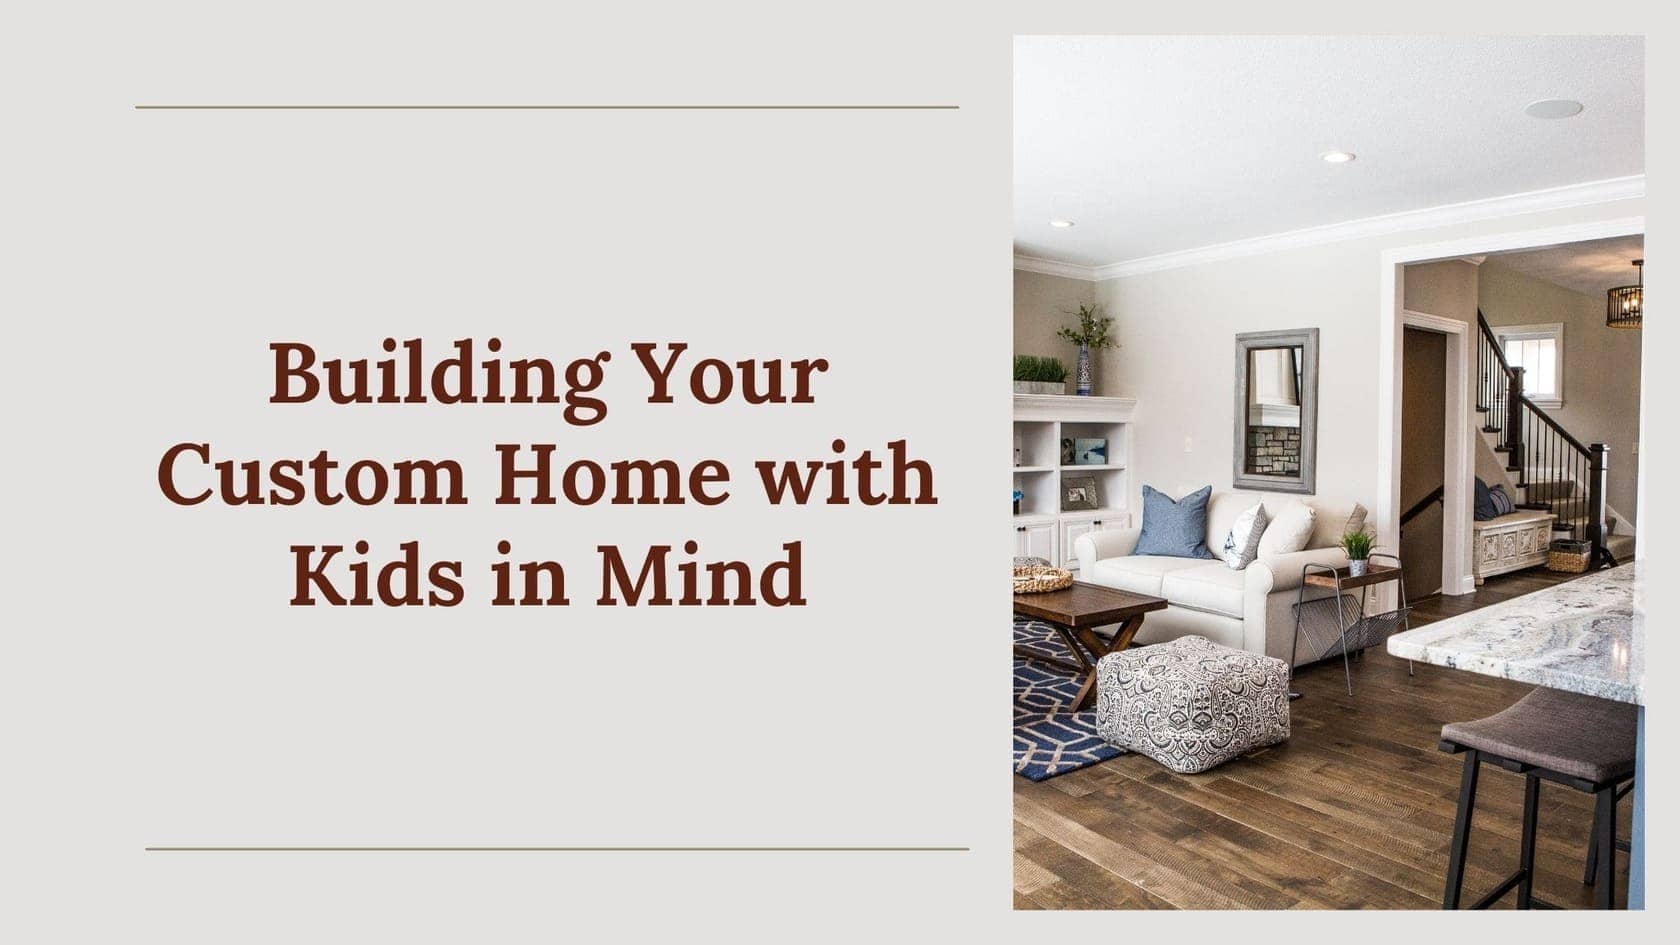 Building Your Custom Home with Kids in Mind